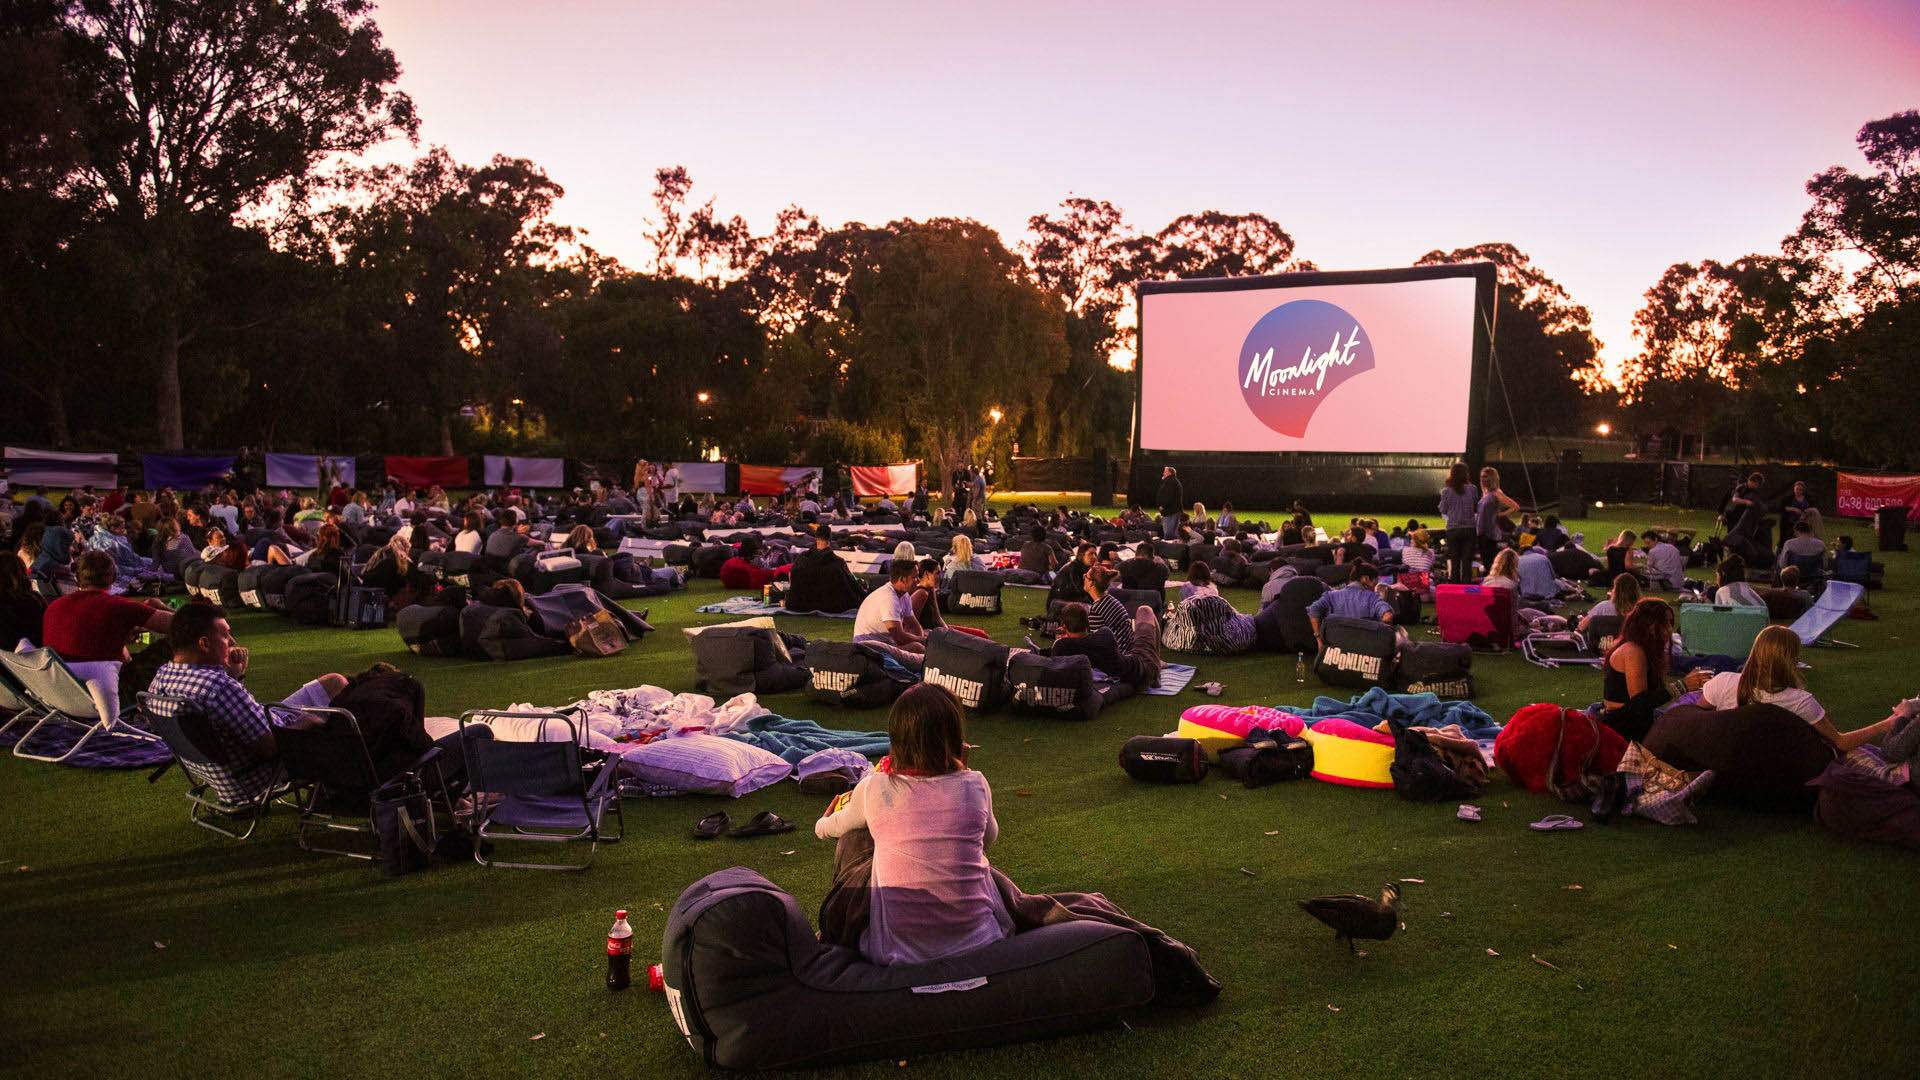 Moonlight Cinema Has Released Its January Lineup So You Can Spend Summer Seeing Movies by Starlight